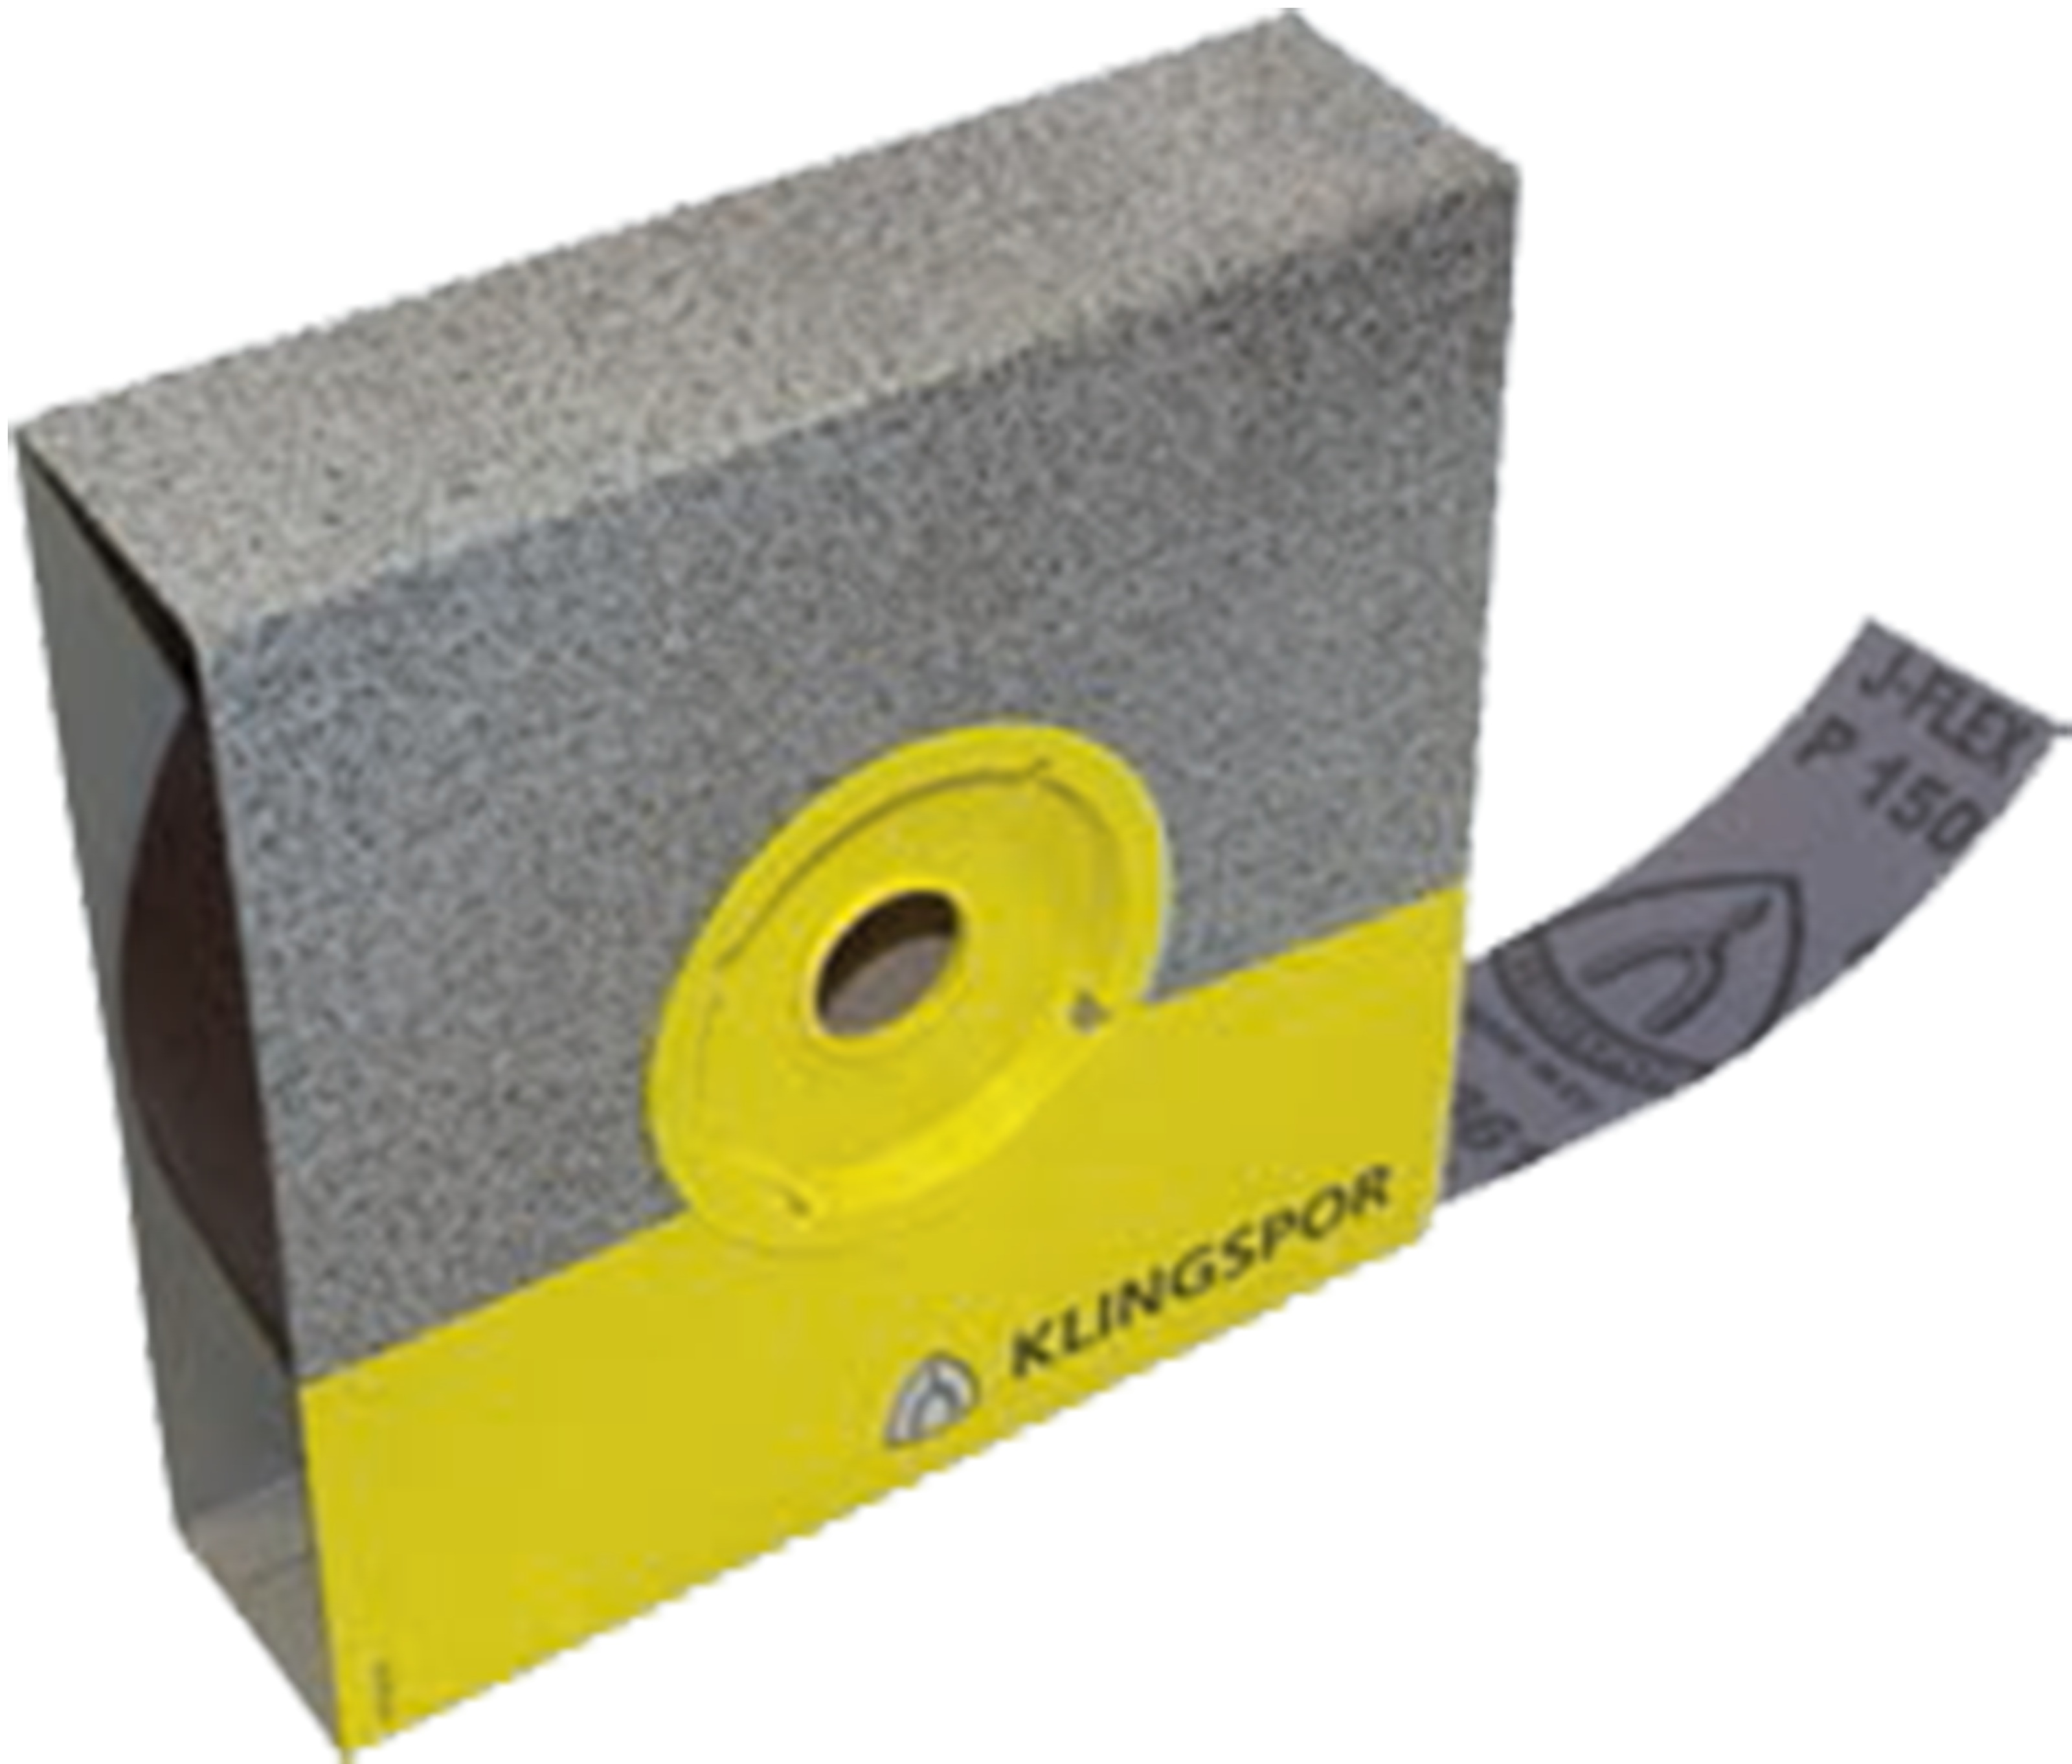 KLINGSPOR ABRASIVE CLOTH ROLL KL 361 JF USED FOR ABRASION AND POLISHING ON METAL IN JEWELLERY INDUSTRY